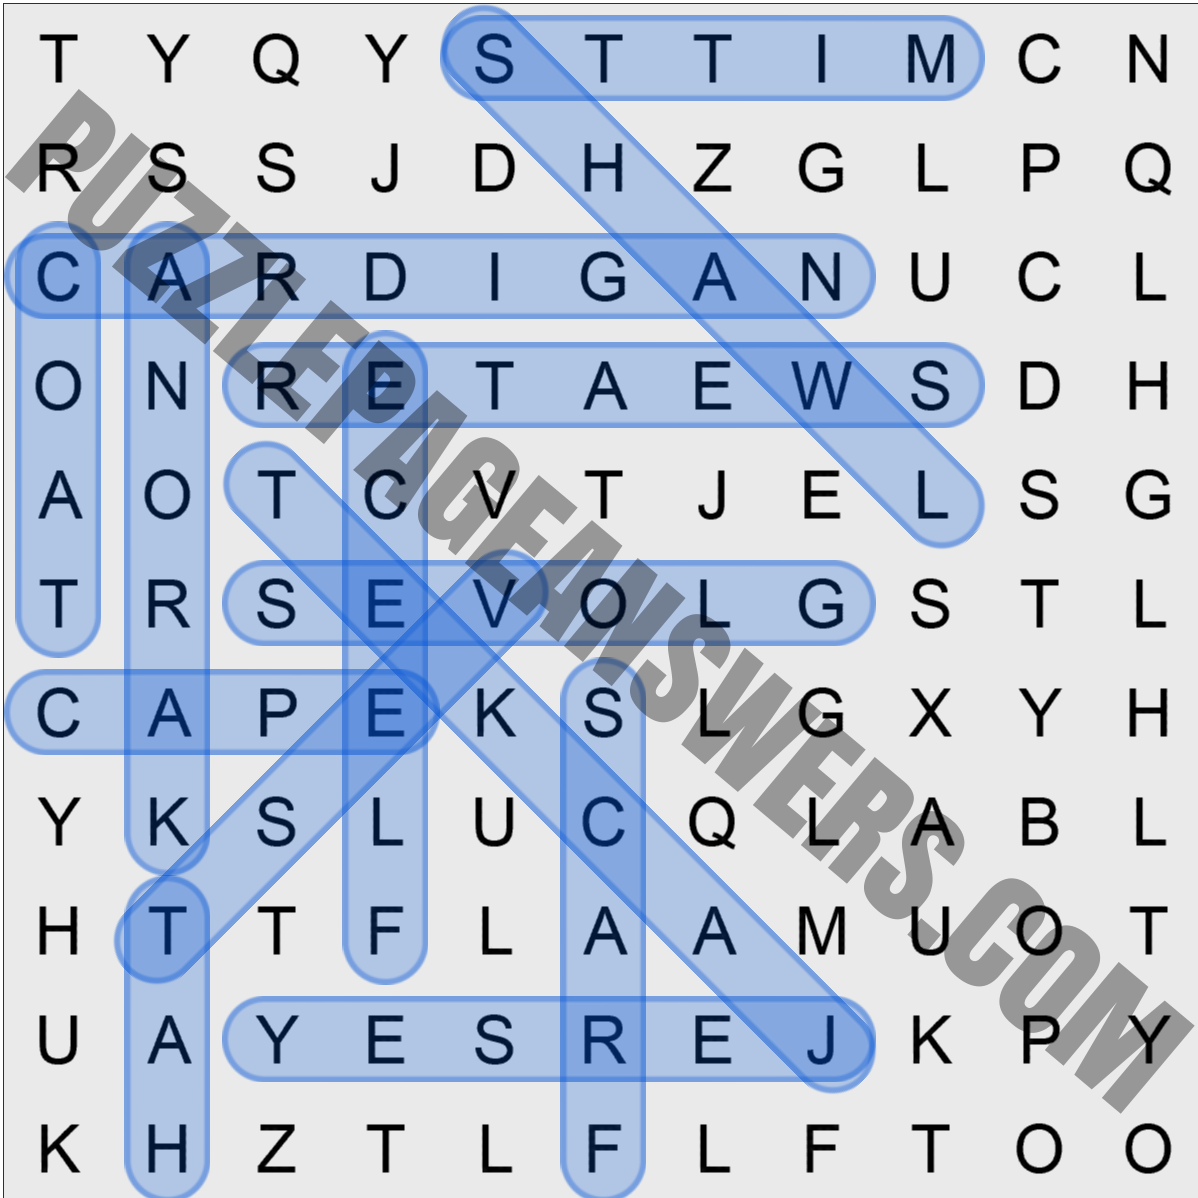 Puzzle Page Daily Word Search August 3 2018 Answers PuzzlePageAnswers com